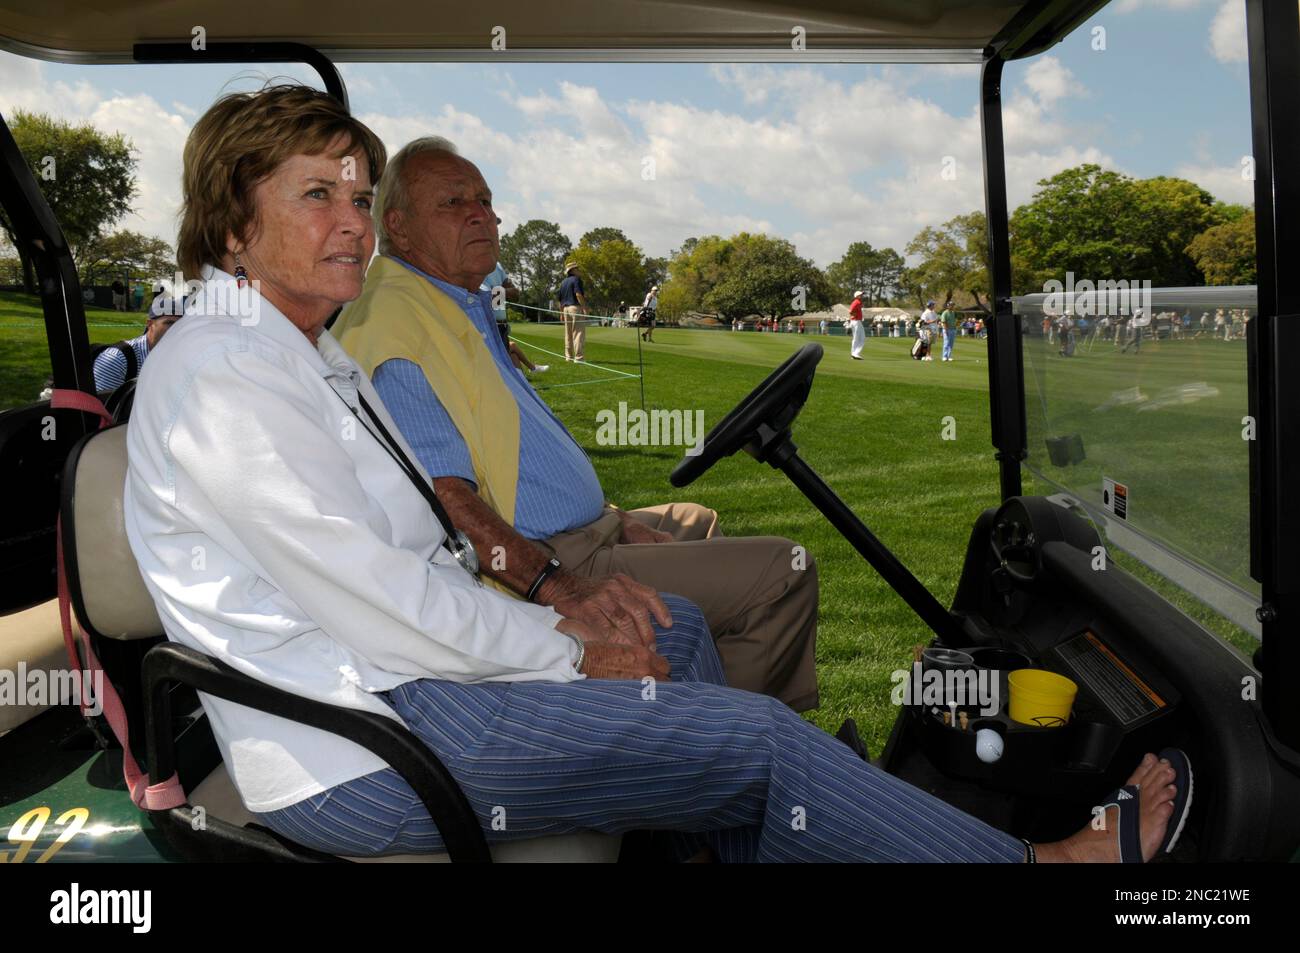 Arnold Palmer, and wife Kit, left, watch from a cart along the 18th fairway while following Palmers grandson, Sam Saunders, in the orange shirt, during the first round of the Arnold Palmer